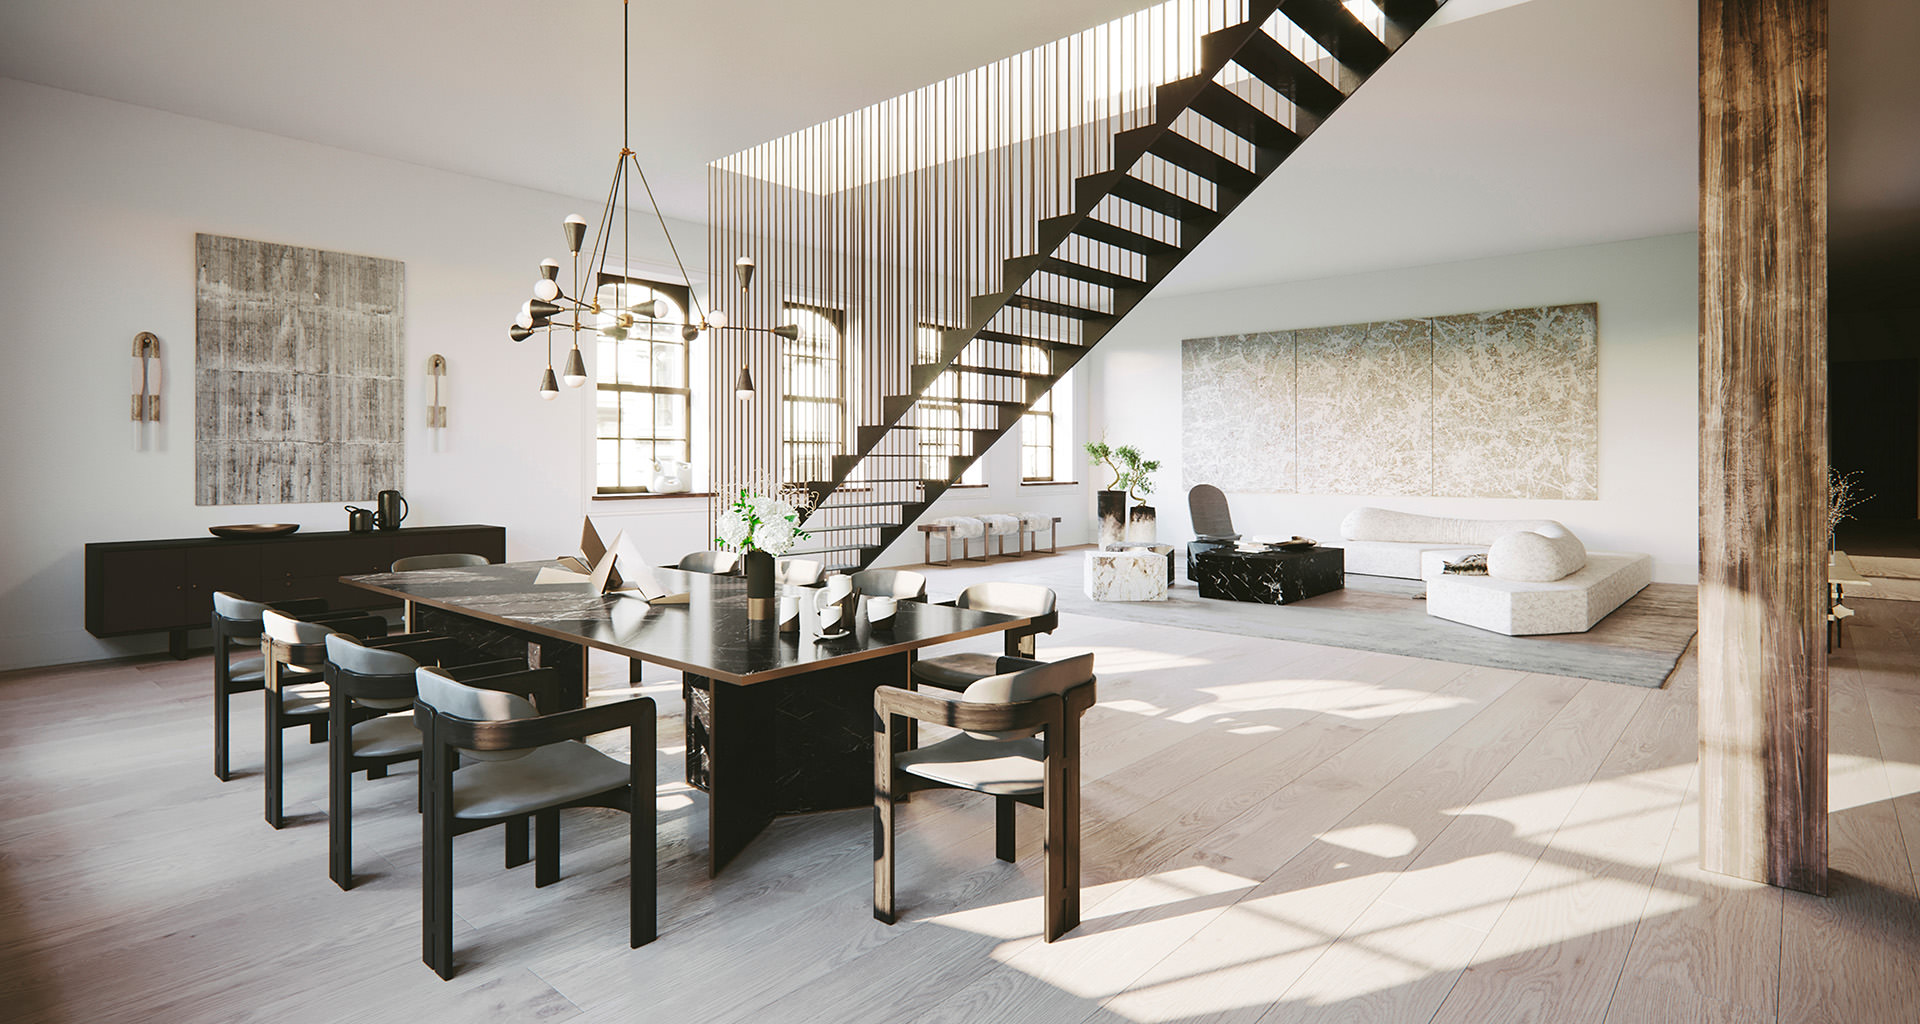 Photorealistic 3D render of a dining room with furniture in marble and wood, a blackened steel staircase to the rooftop in a loft apartment.